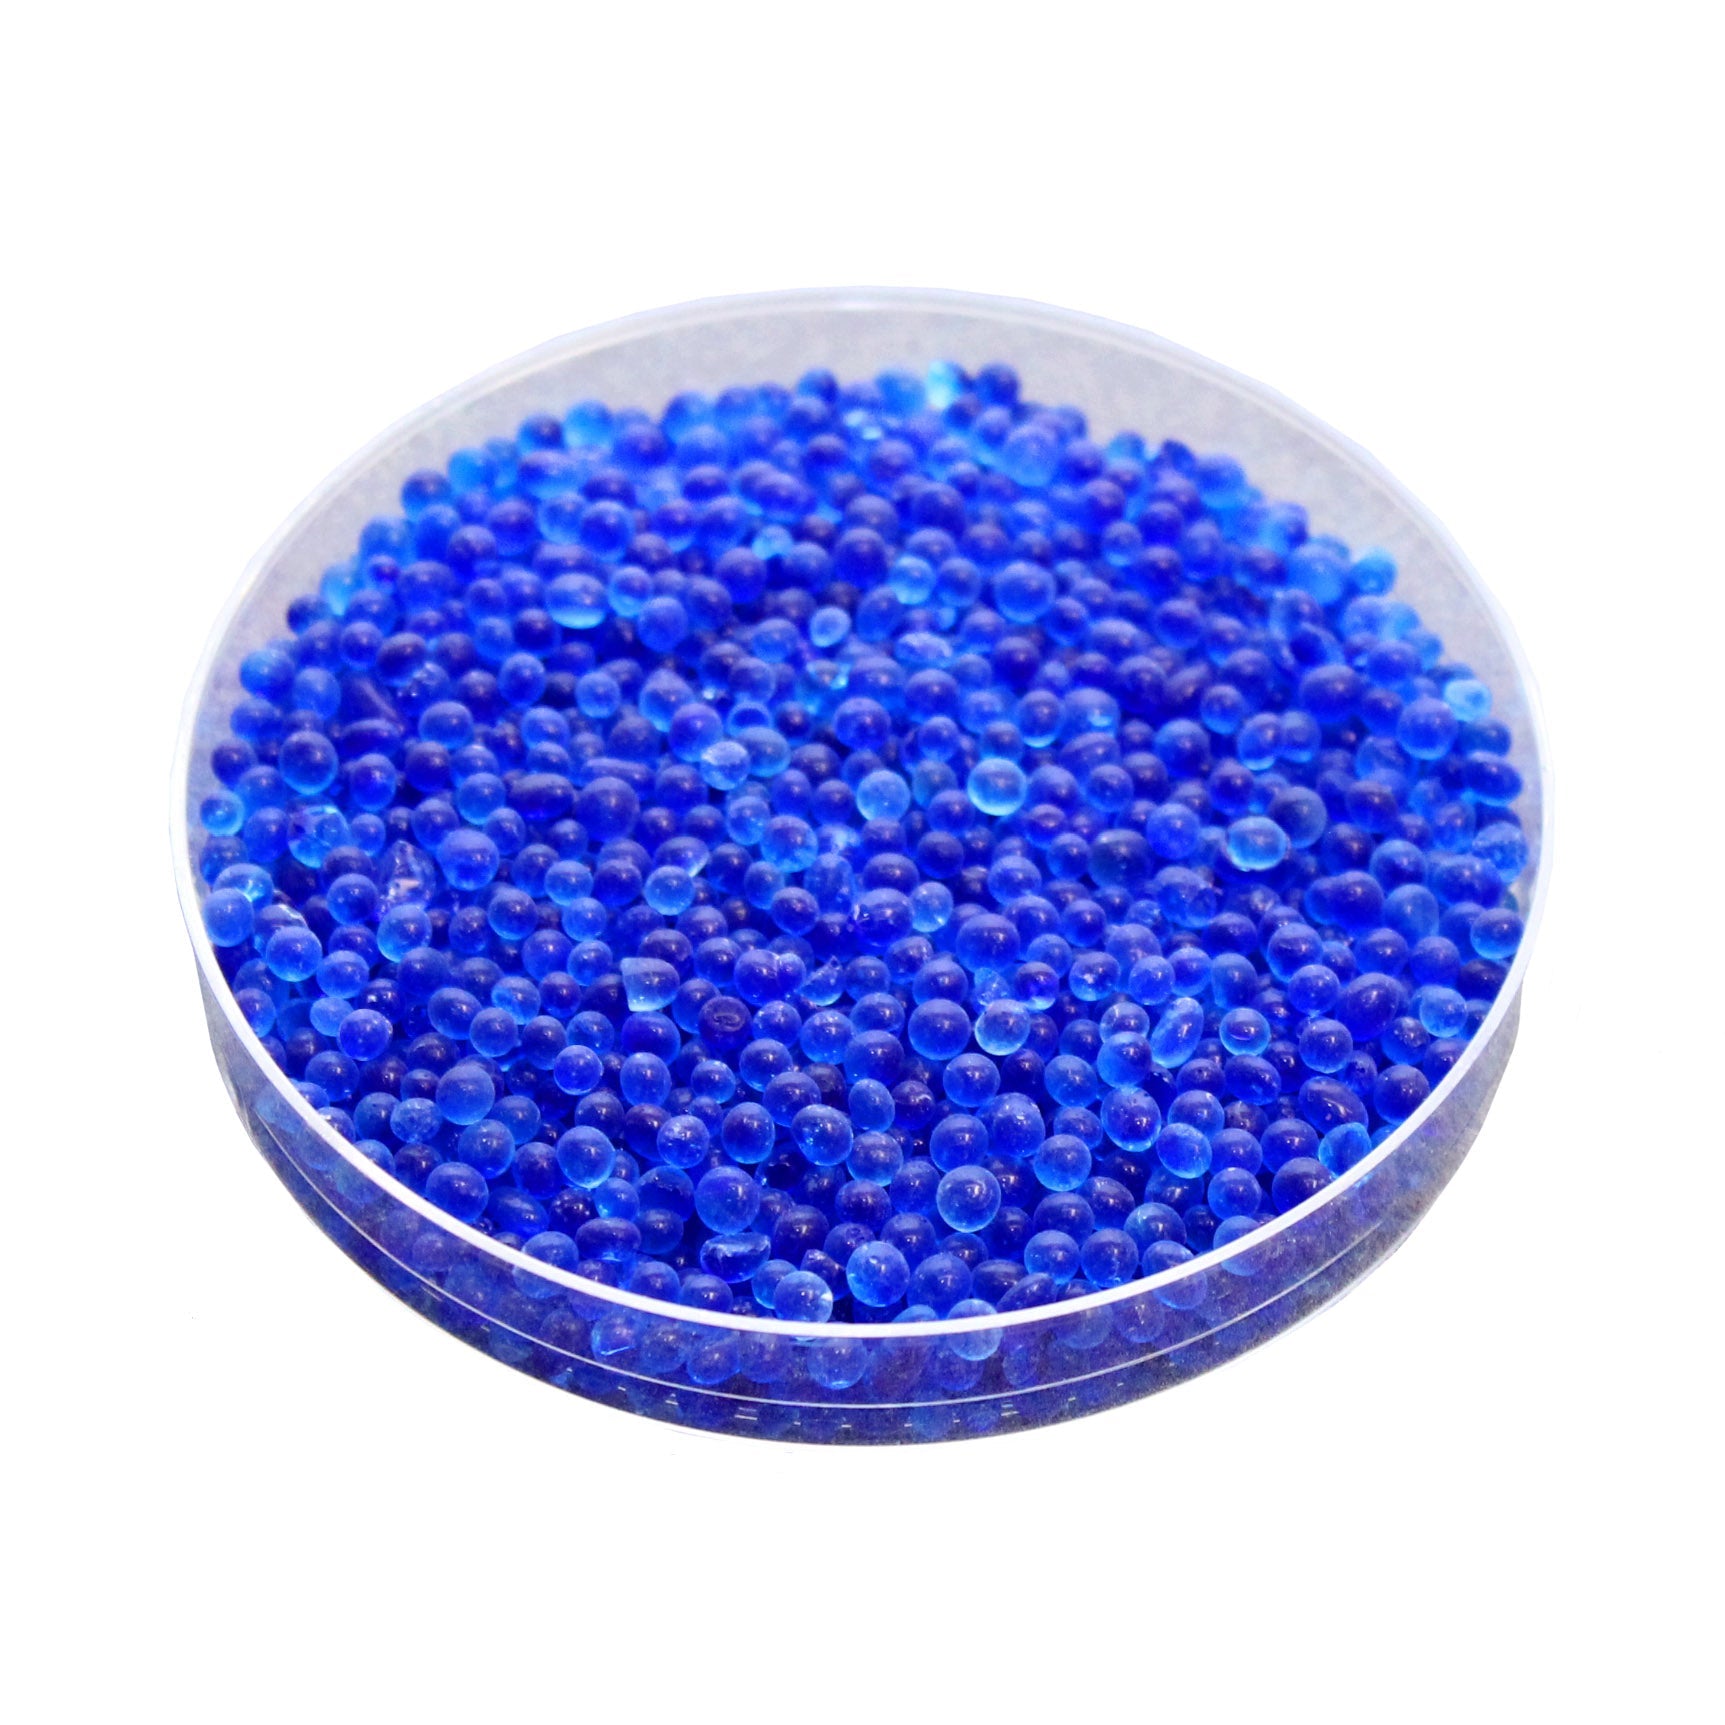 1 Gallon Premium Mixed Silicagel Beads with Blue Indicating Beads(Industry  Standard 3-5mm) - 7 LBS Reusable